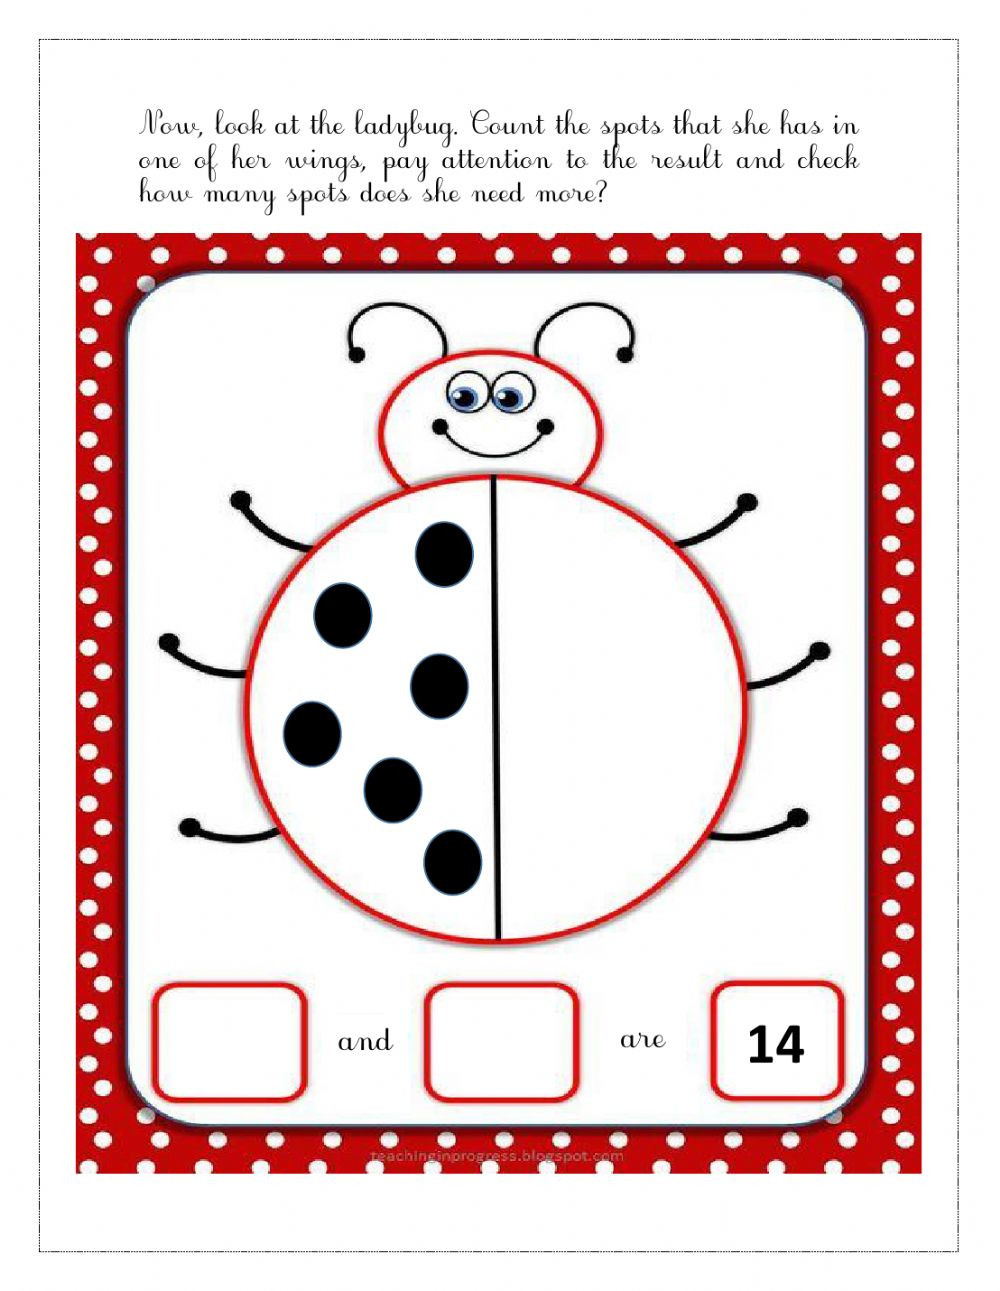 Composing and Decomposing Numbers Worksheet Pose and De Pose Interactive Worksheet